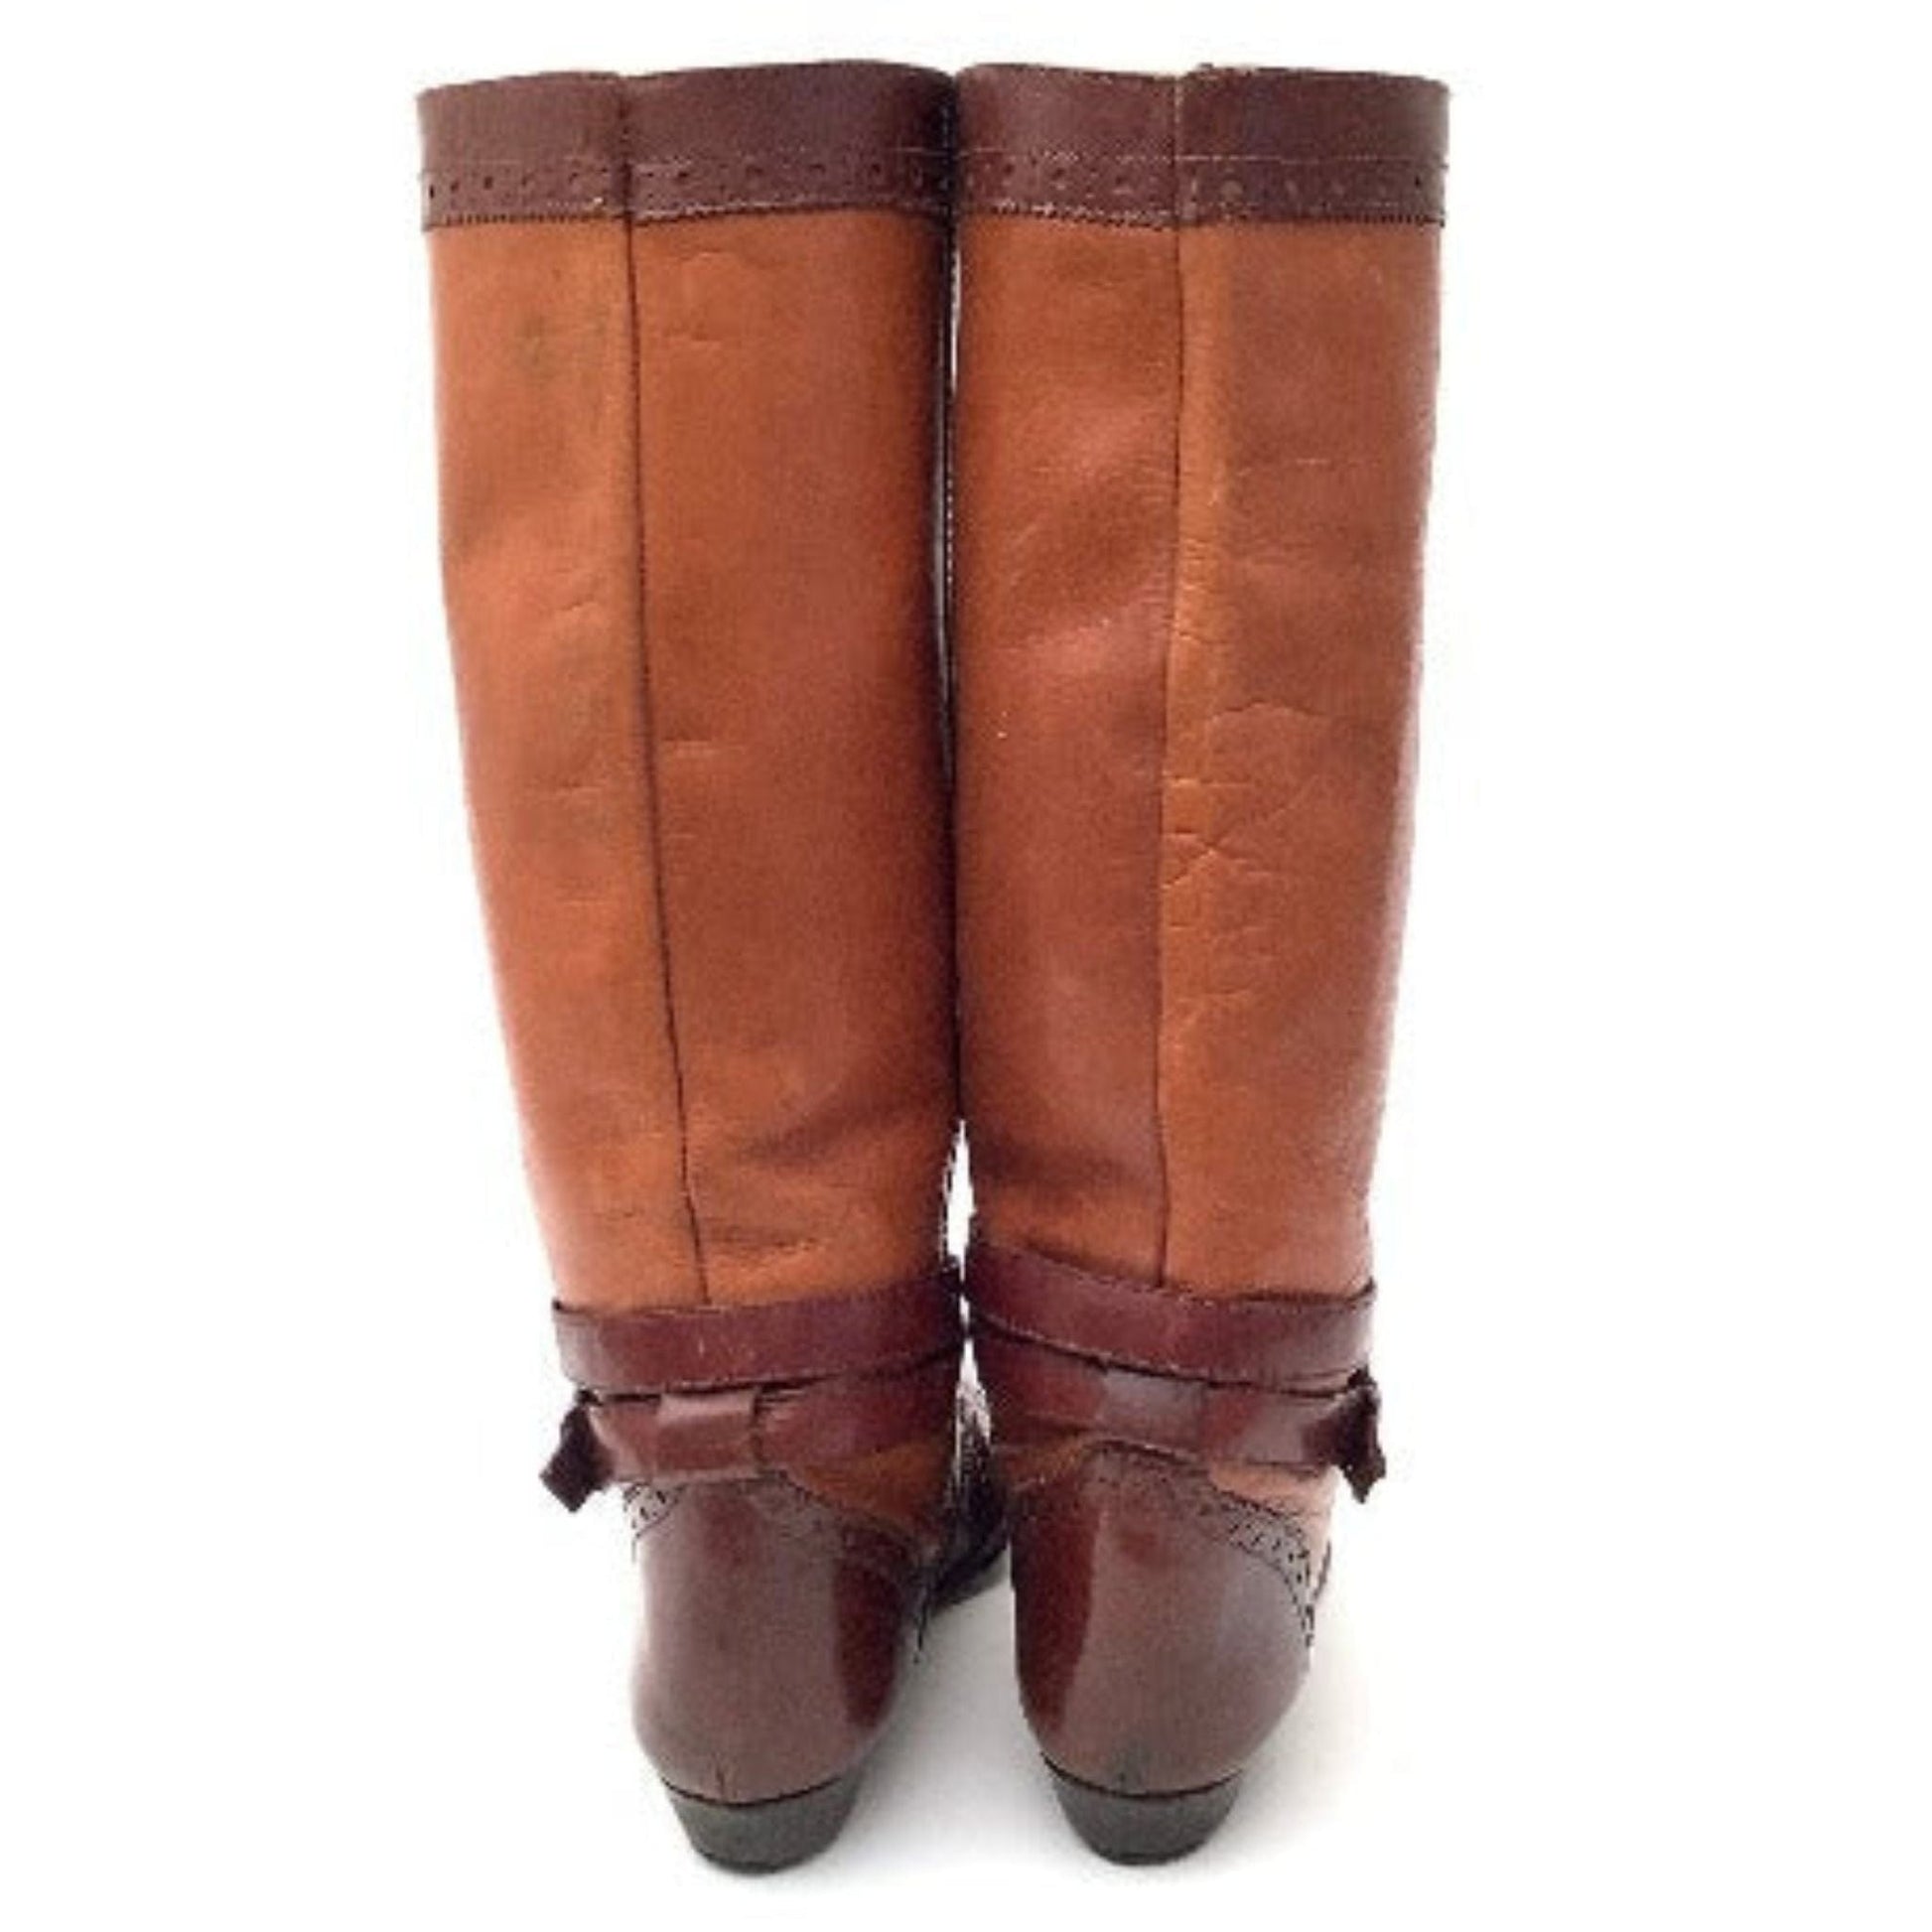 1980s Brown Leather Boots 7 / Brown / Vintage 1980s